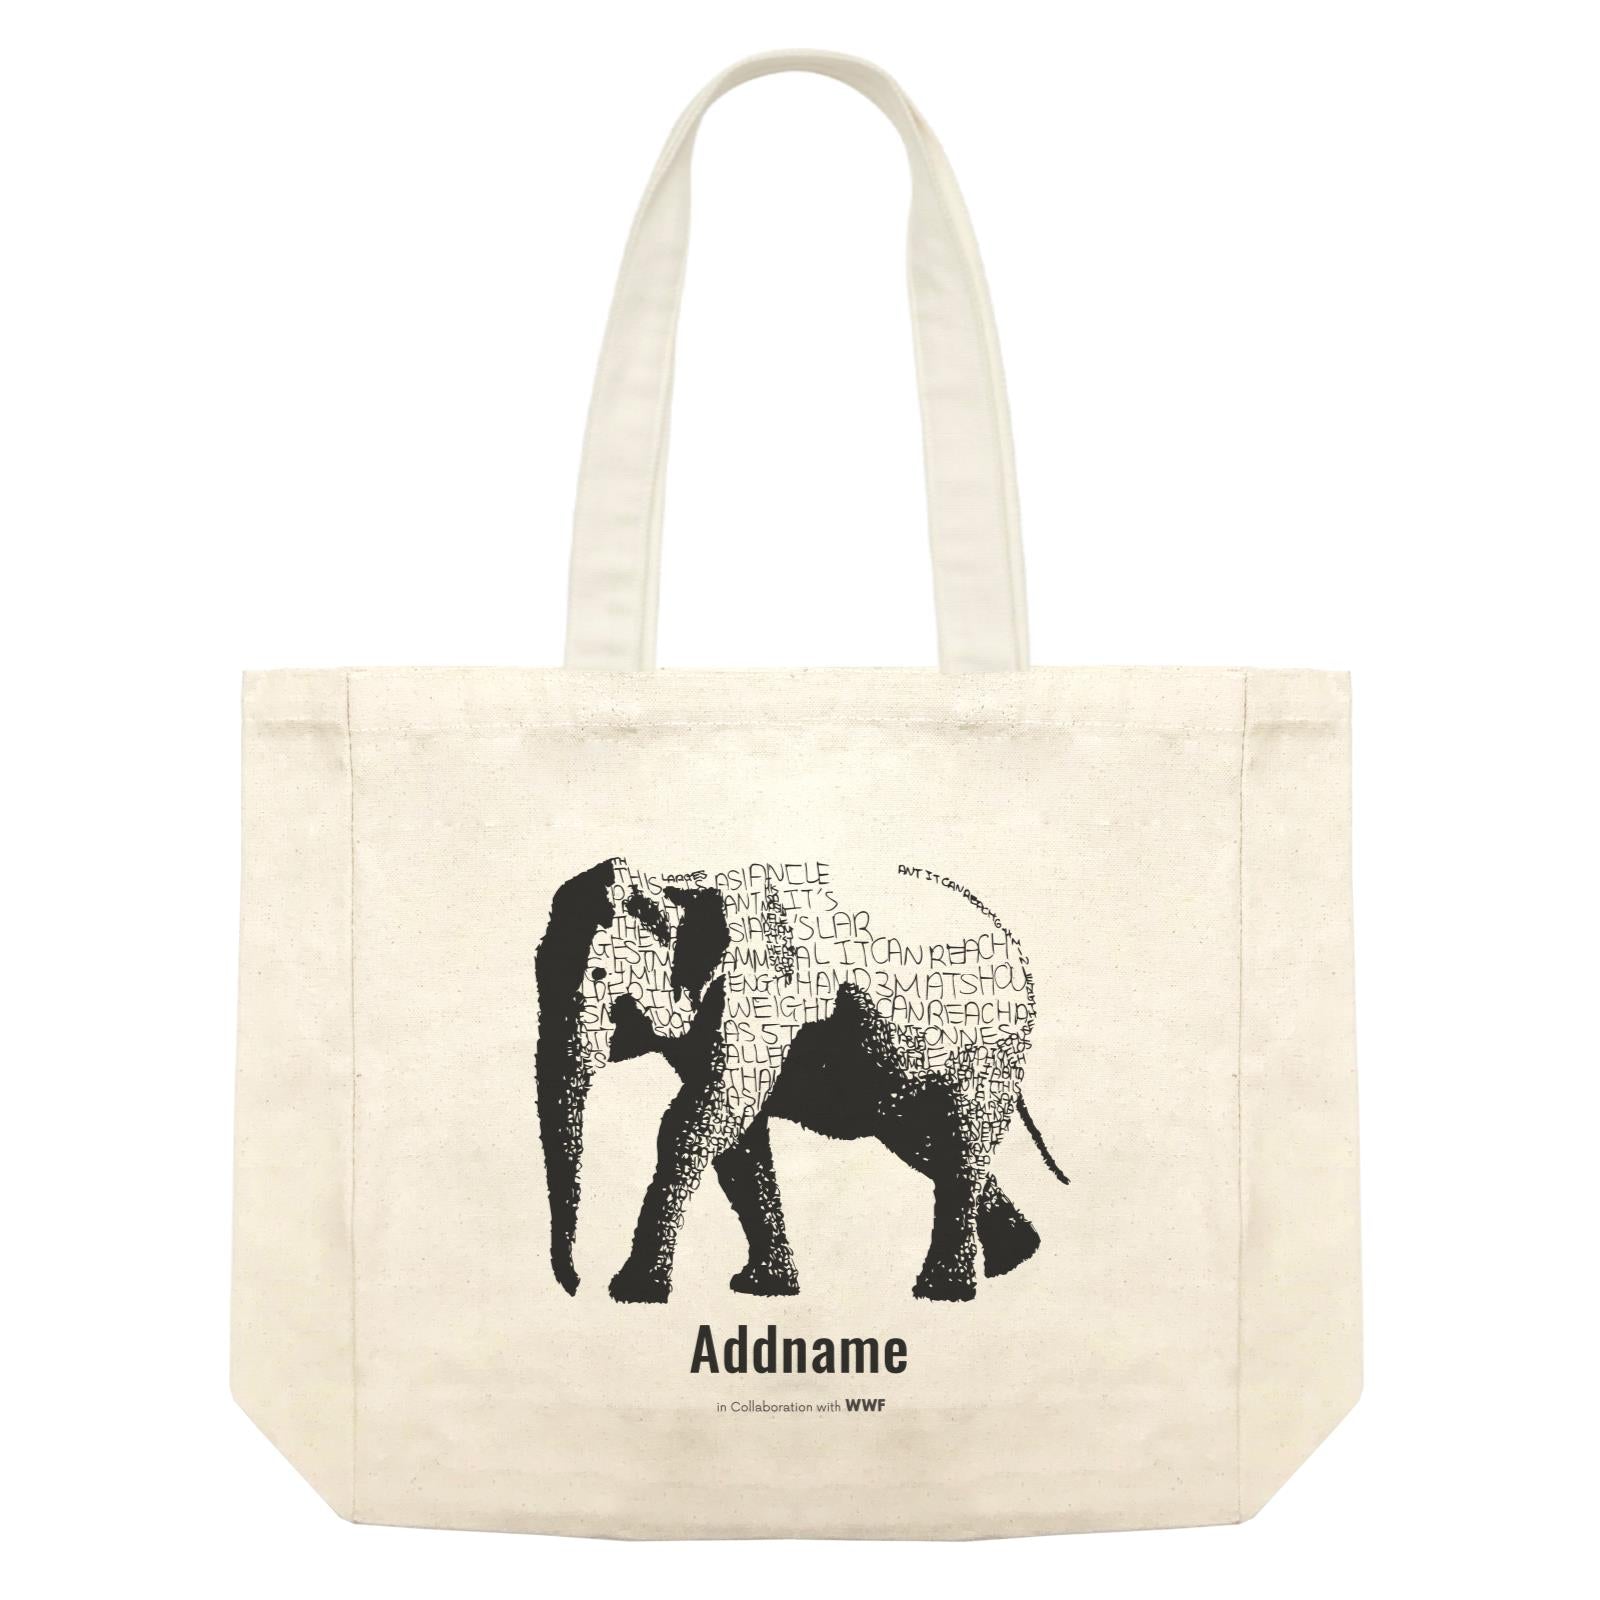 Hand Written Animals Asiatic Elephant By ArtC Addname Shopping Bag